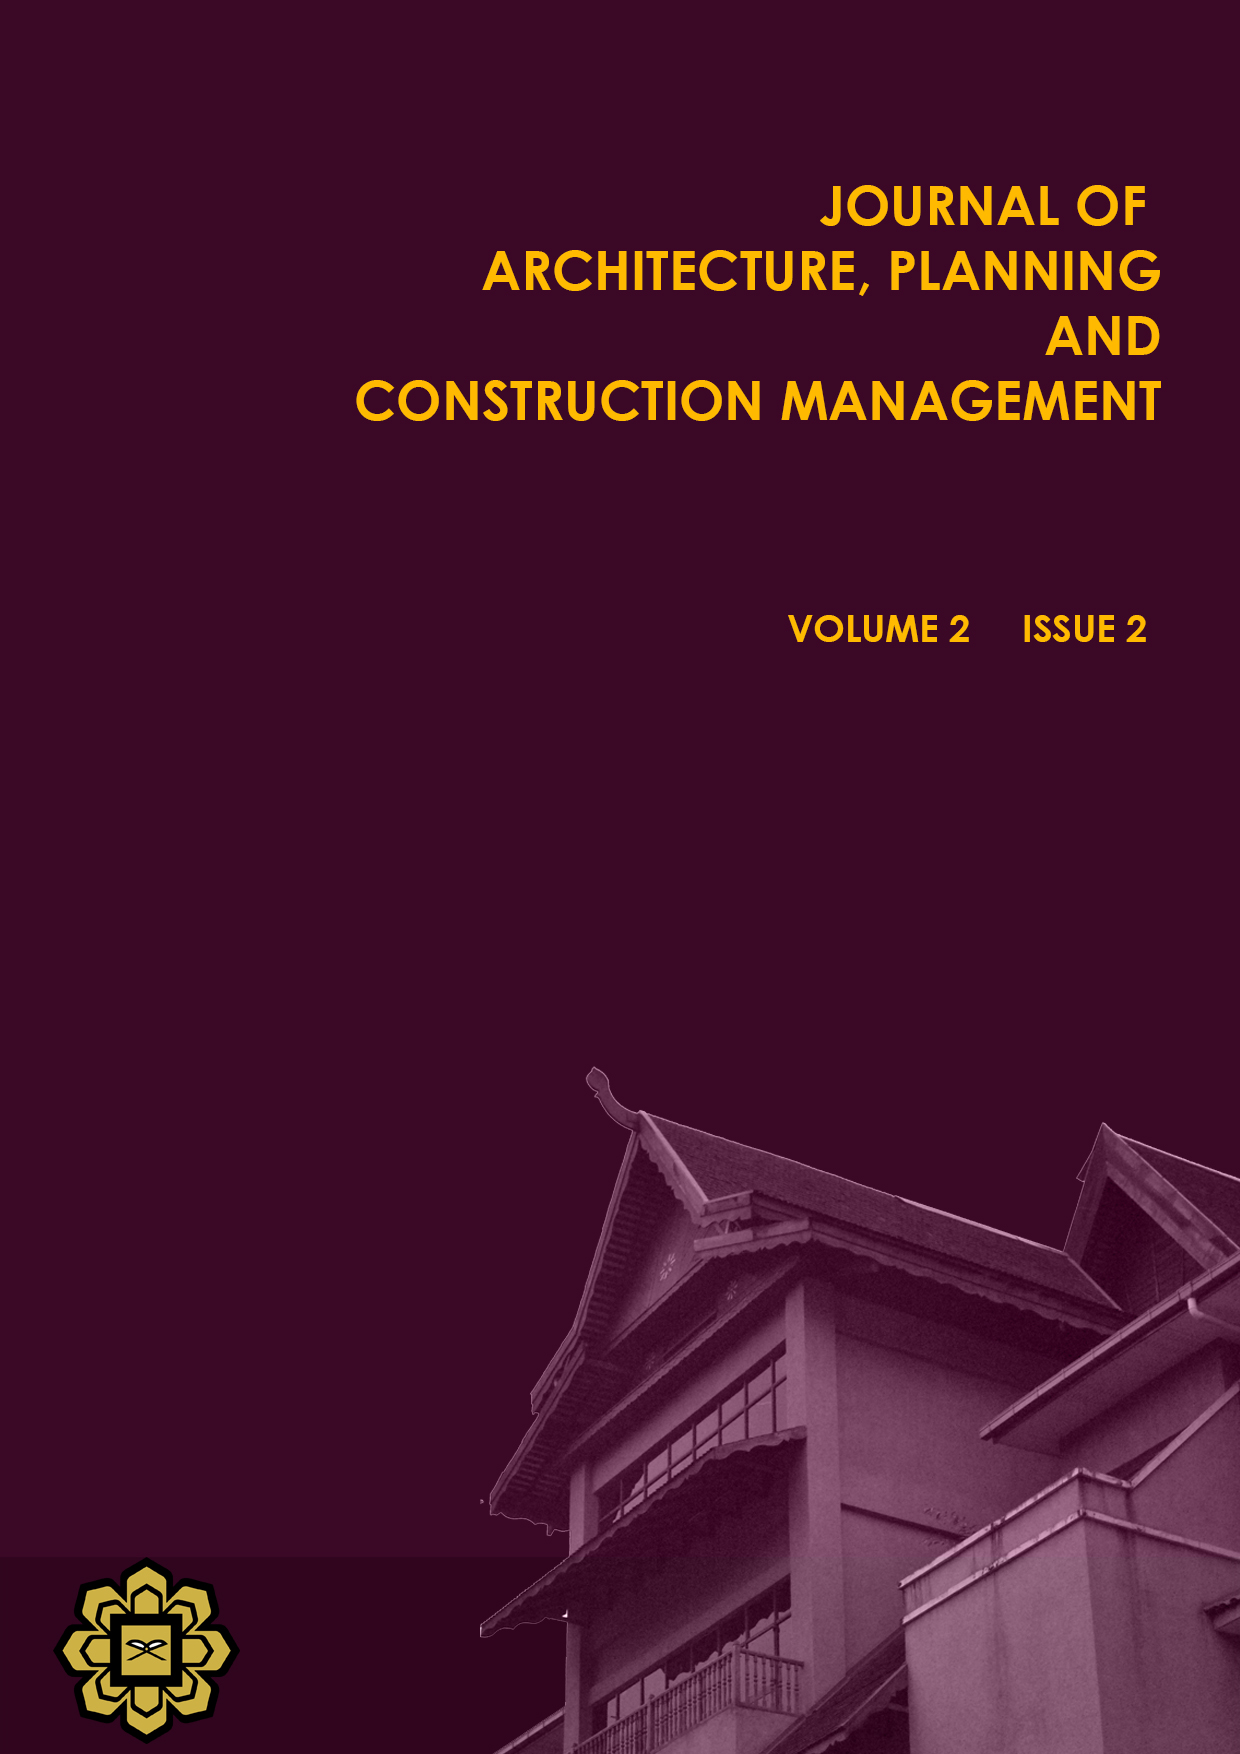 					View Vol. 2 No. 2 (2012): Journal of Architecture, Planning and Construction Management (JAPCM)
				